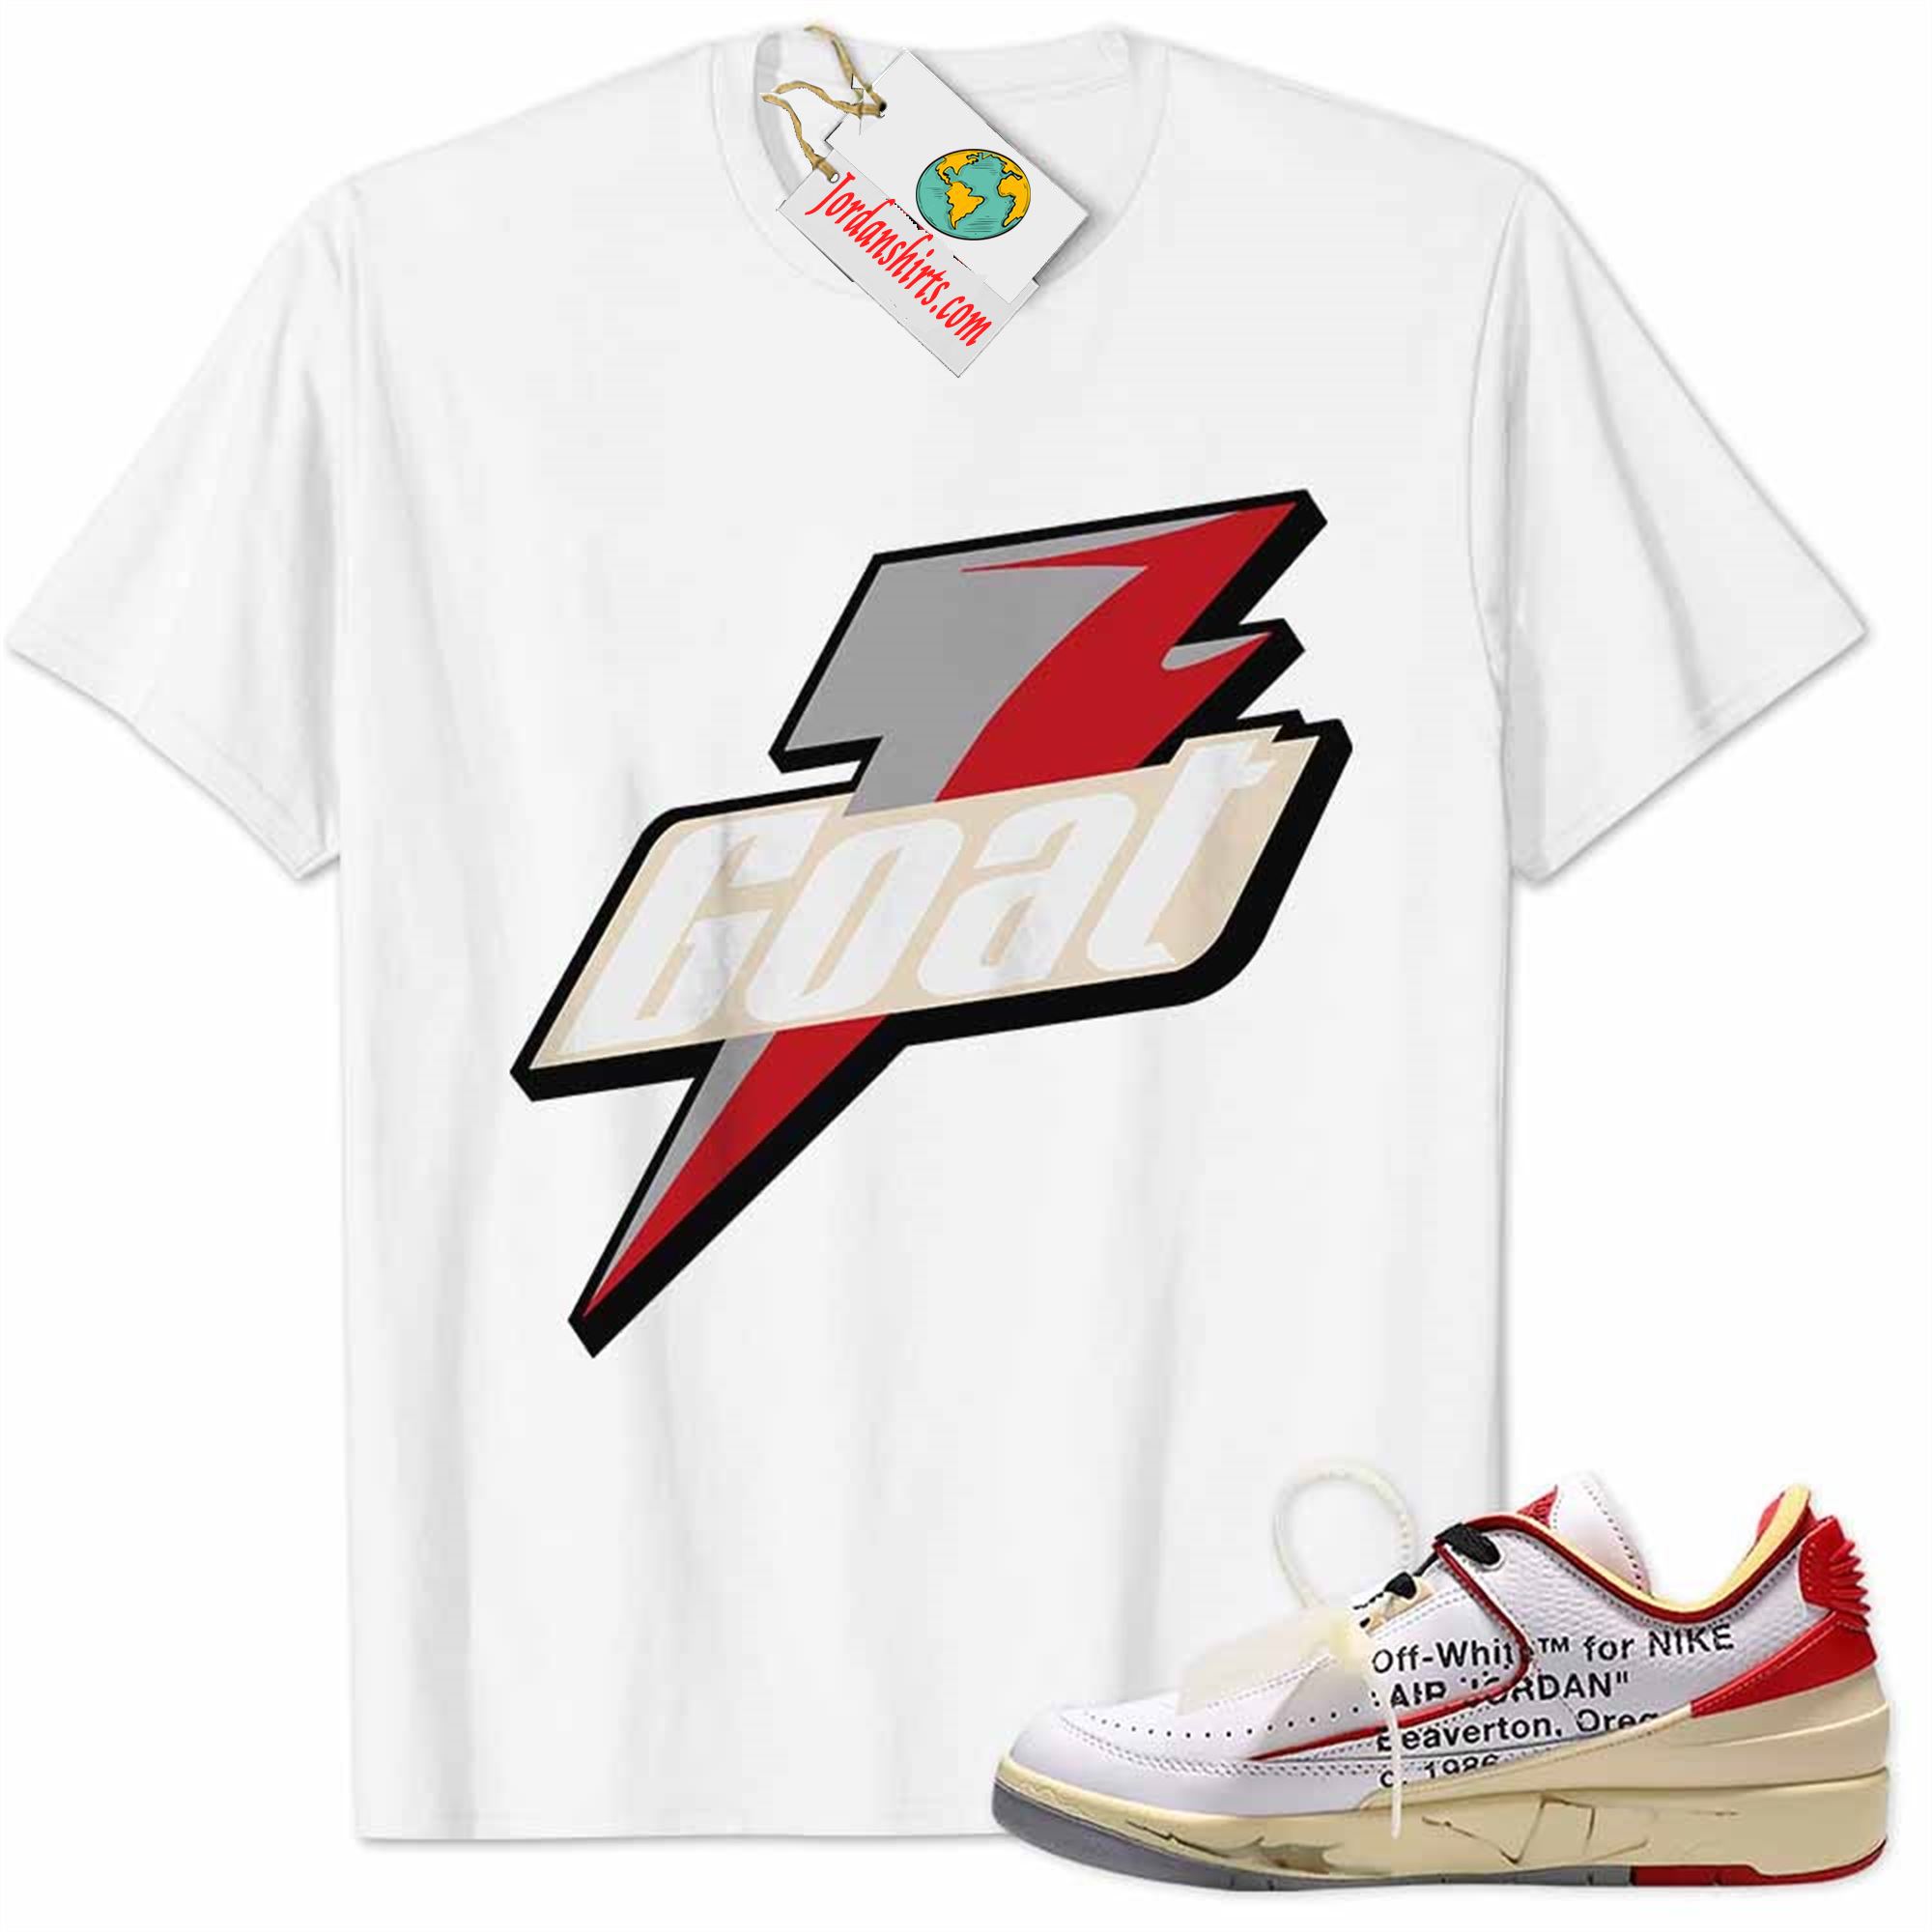 Jordan 2 Shirt, Low White Red Off-white 2s Shirt Goat Greatest Of All Time White Size Up To 5xl